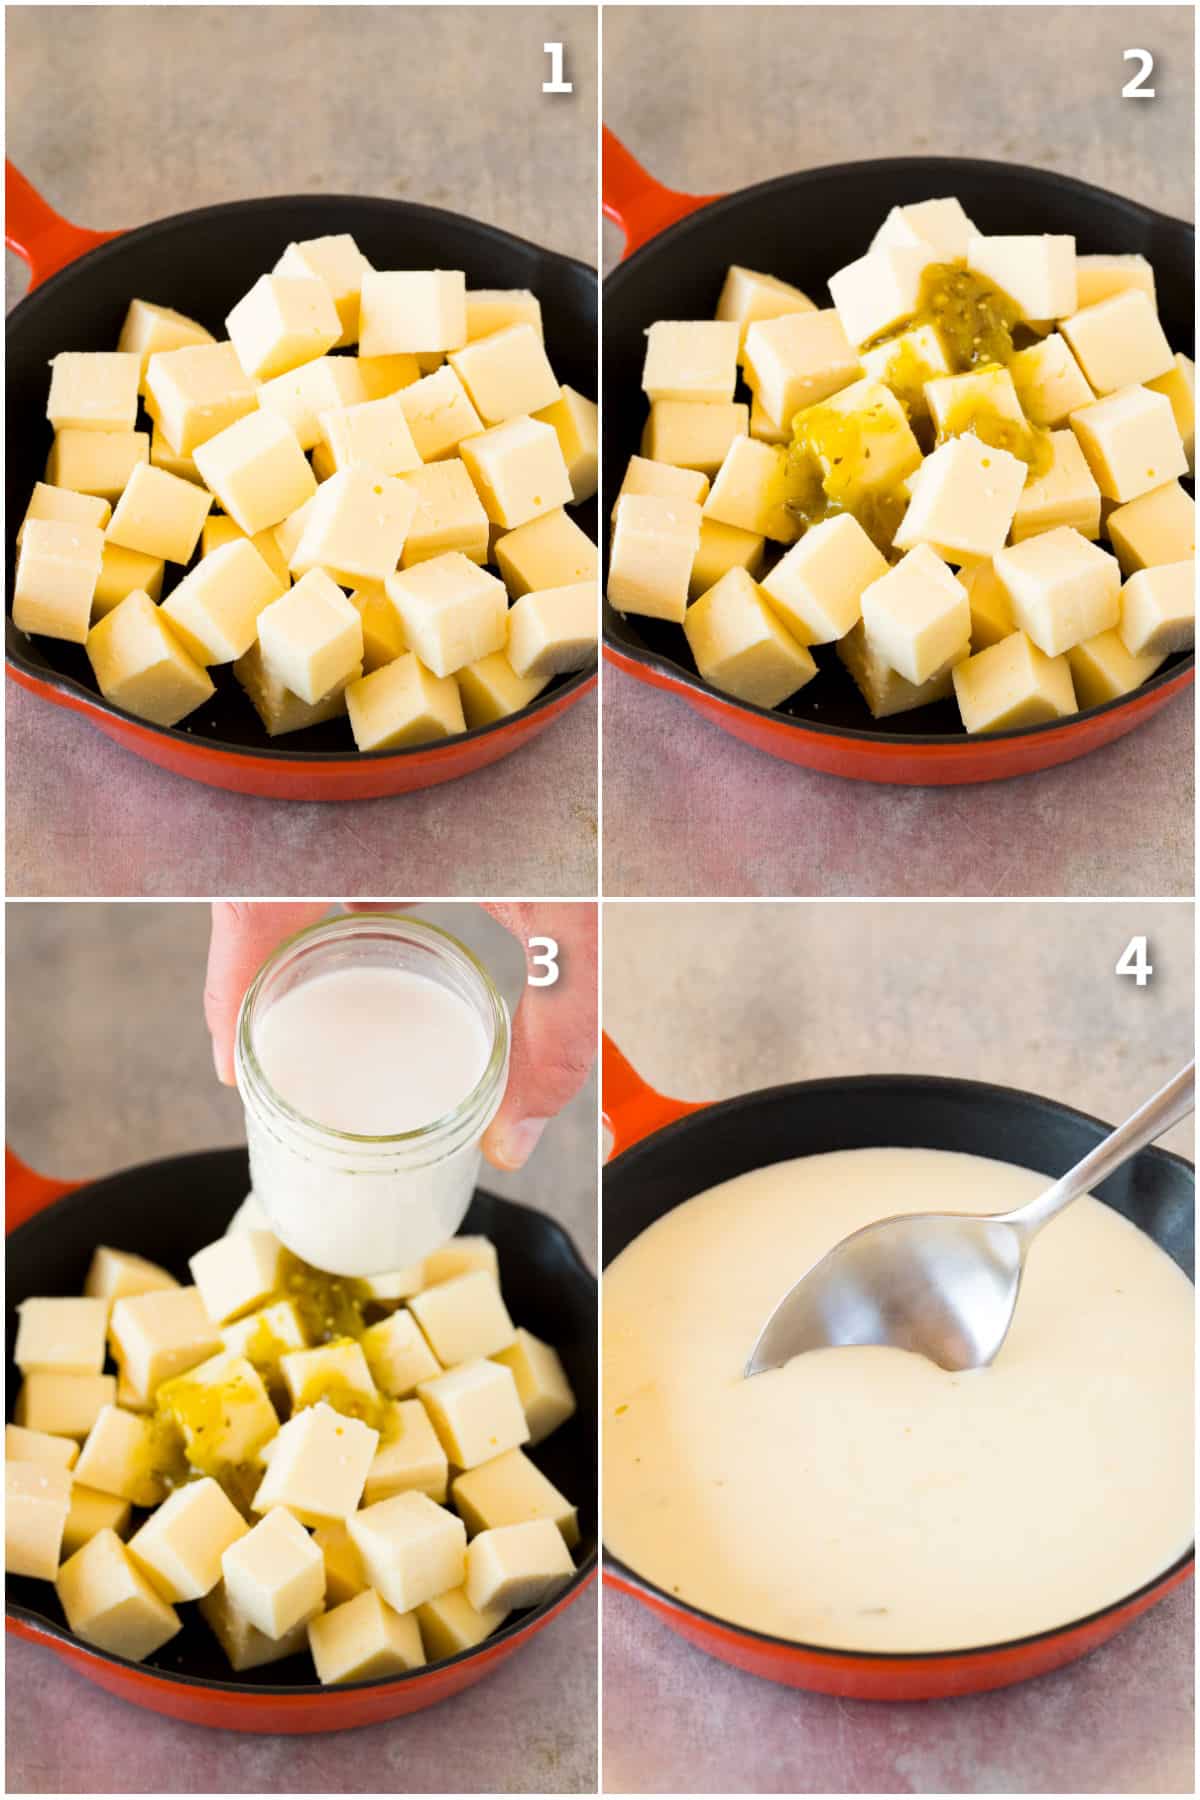 Step by step process shots showing how to make cheese dip.